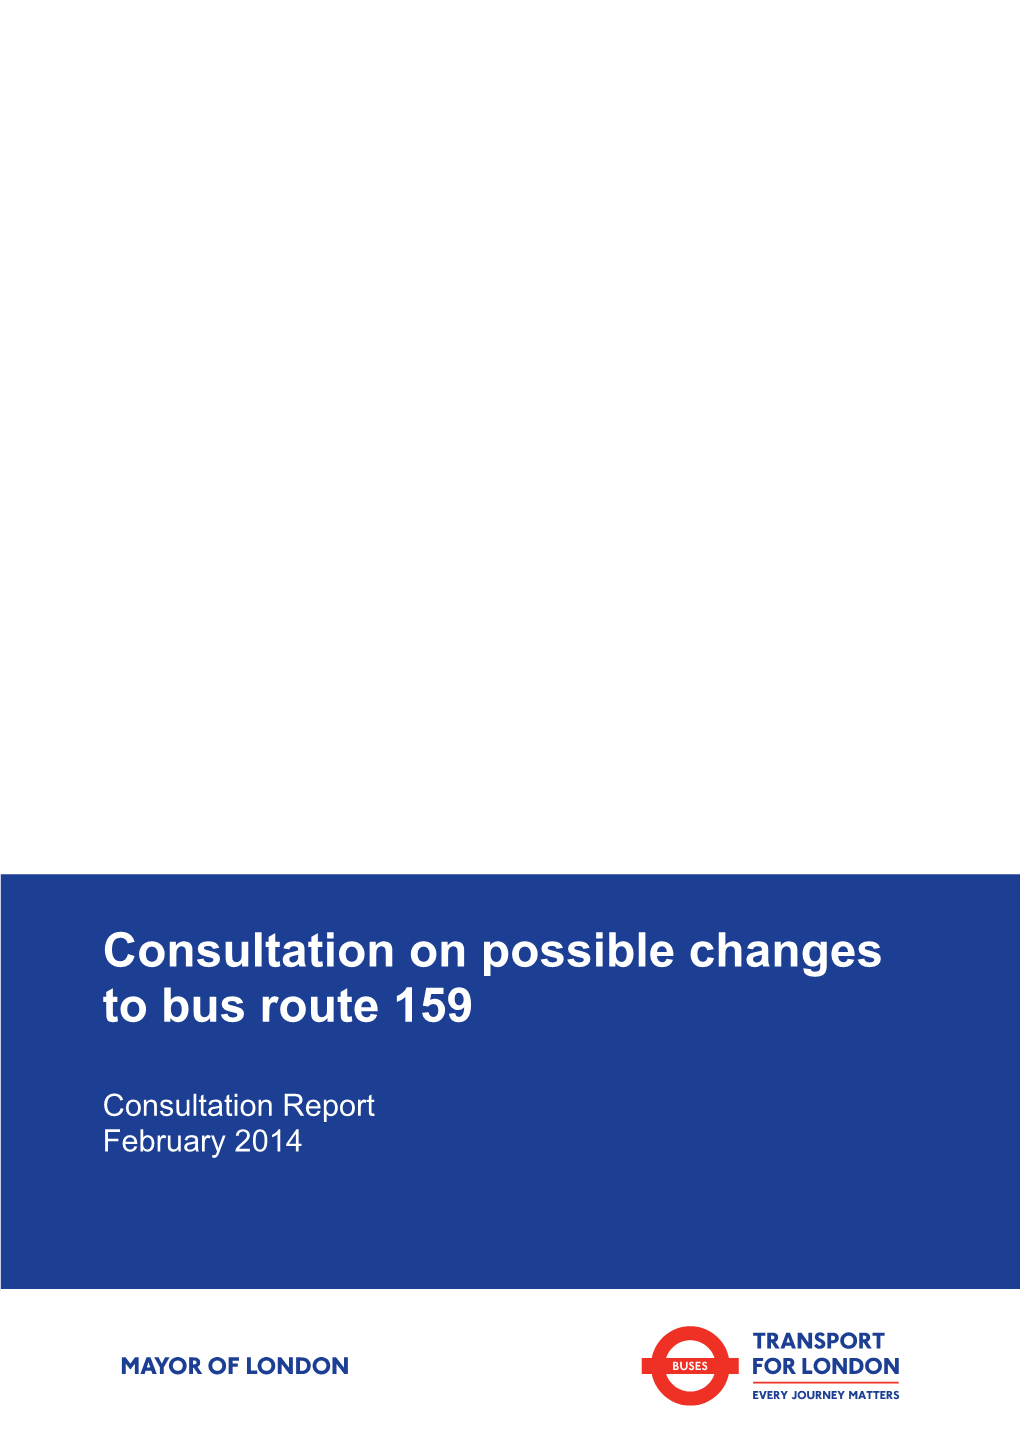 Consultation on Possible Changes to Bus Route 159